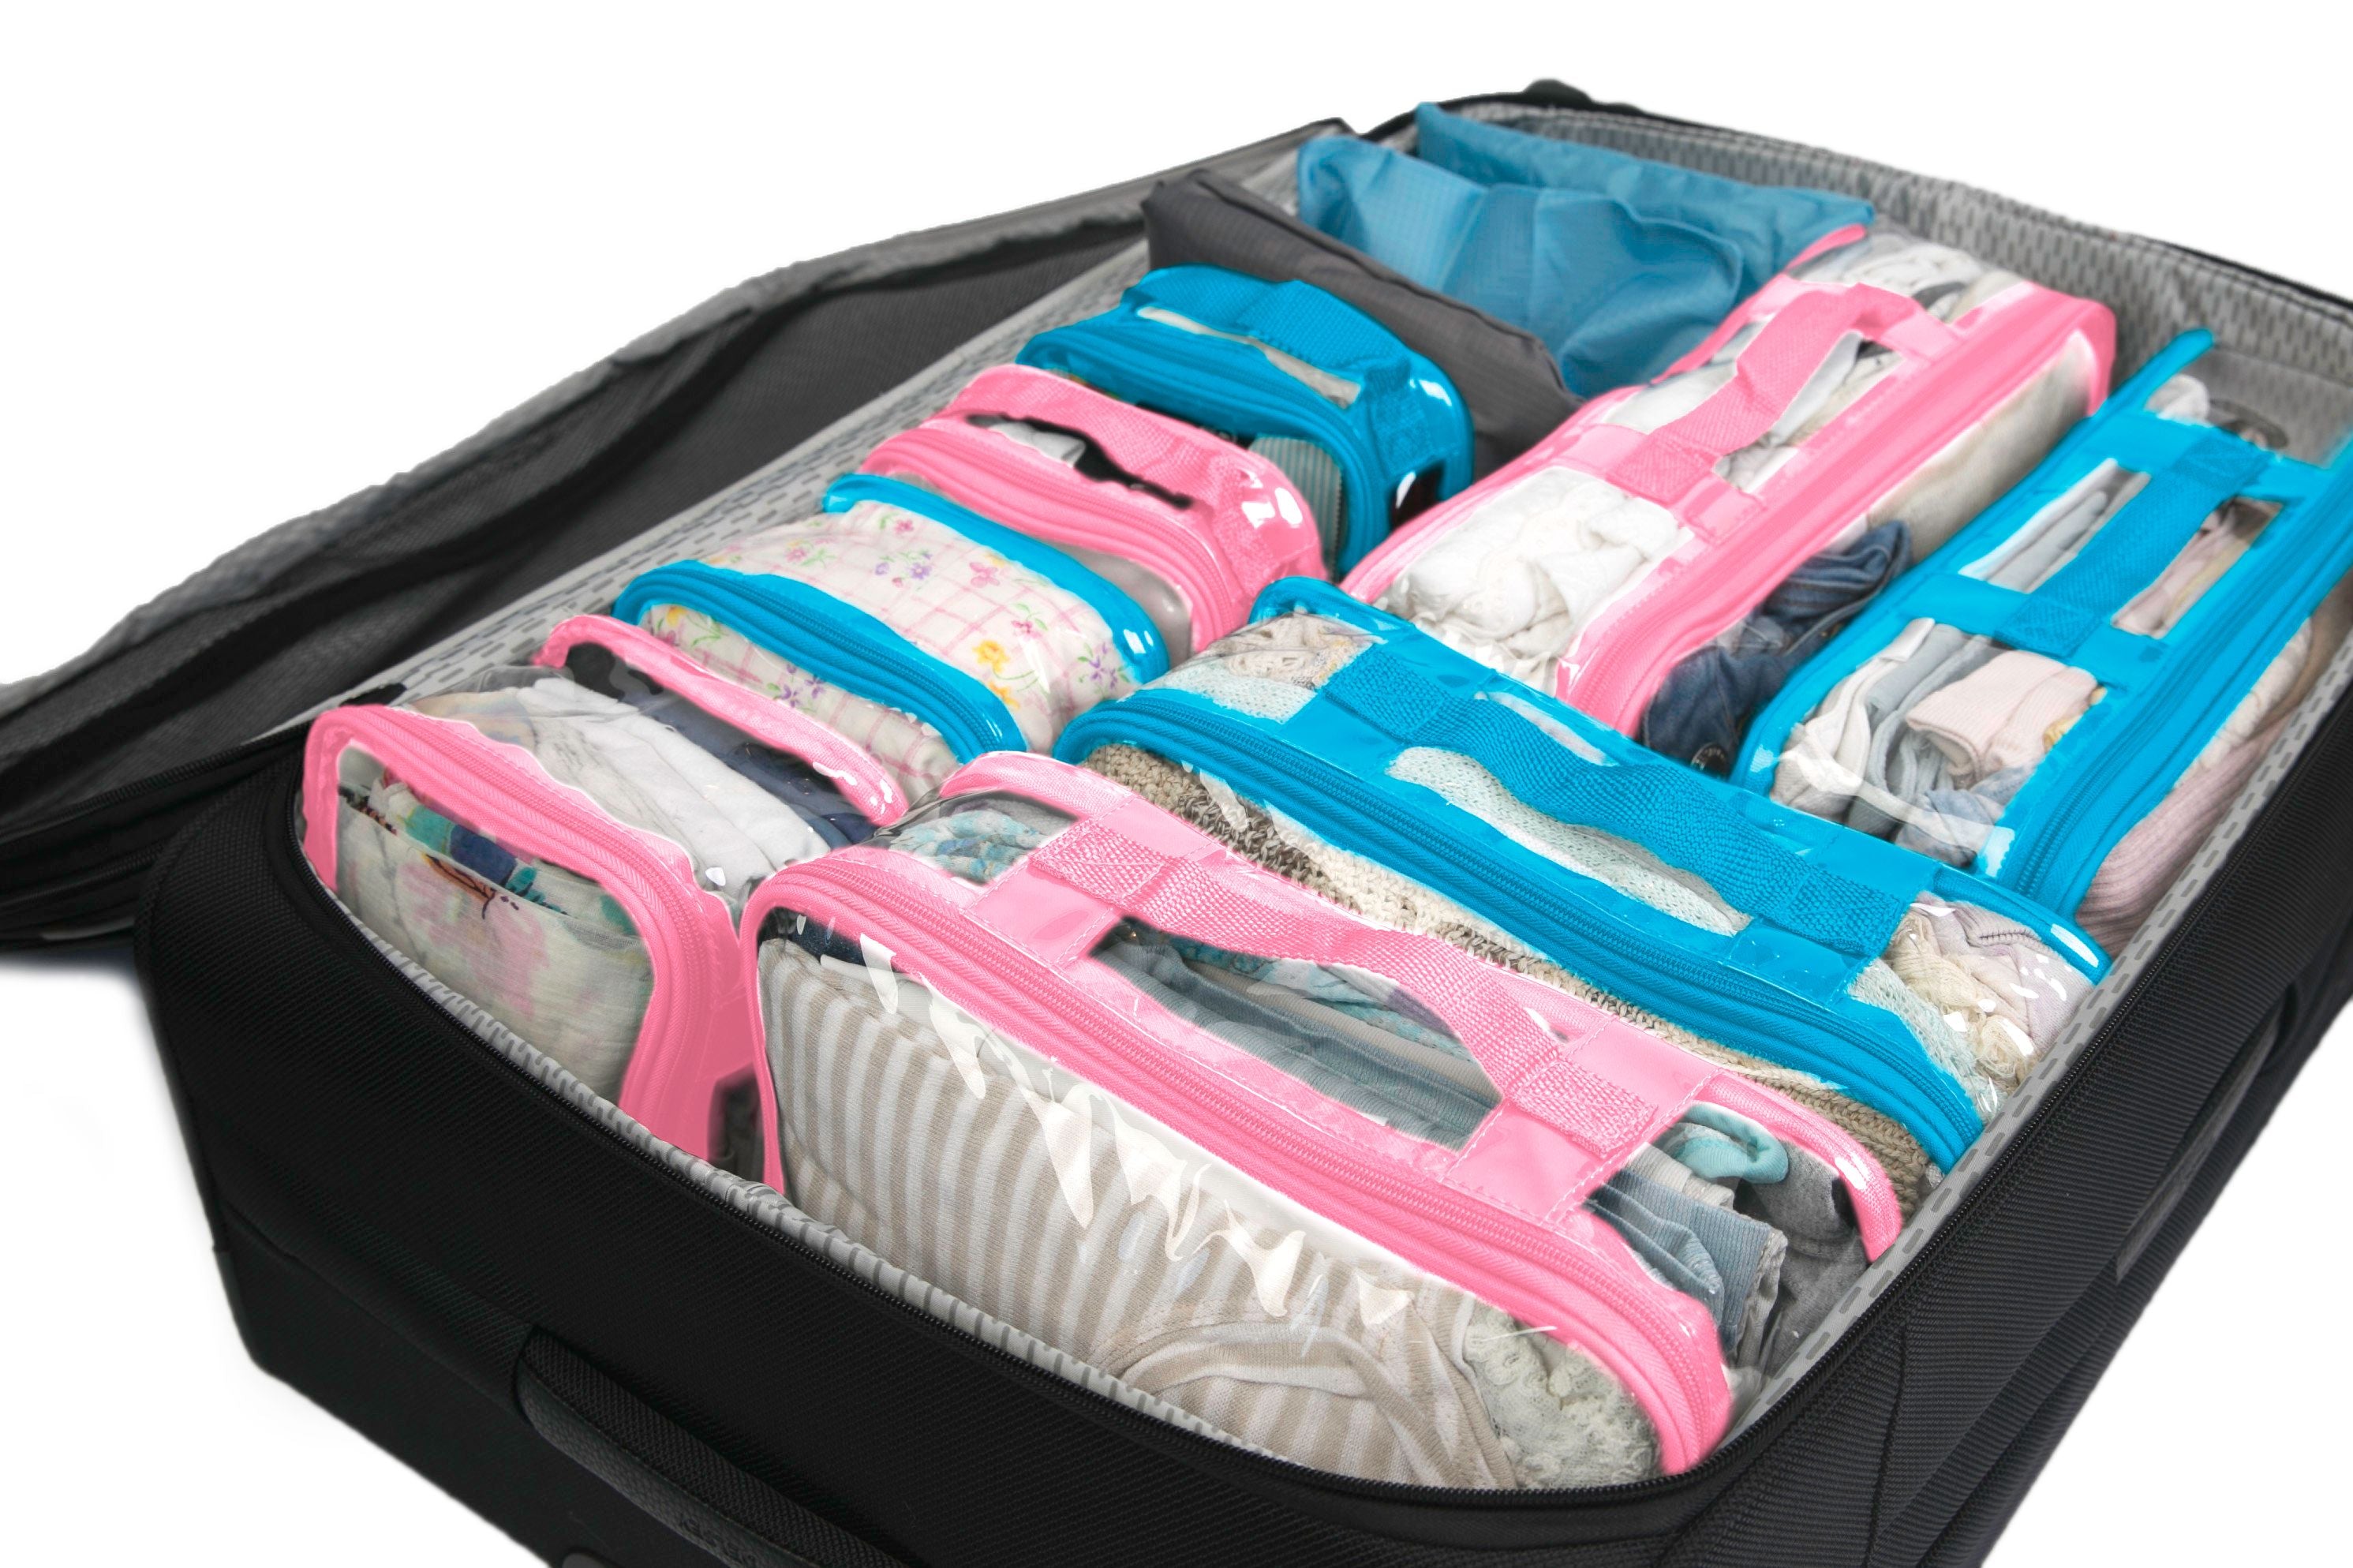 Suitcase organized with Complete Bundle